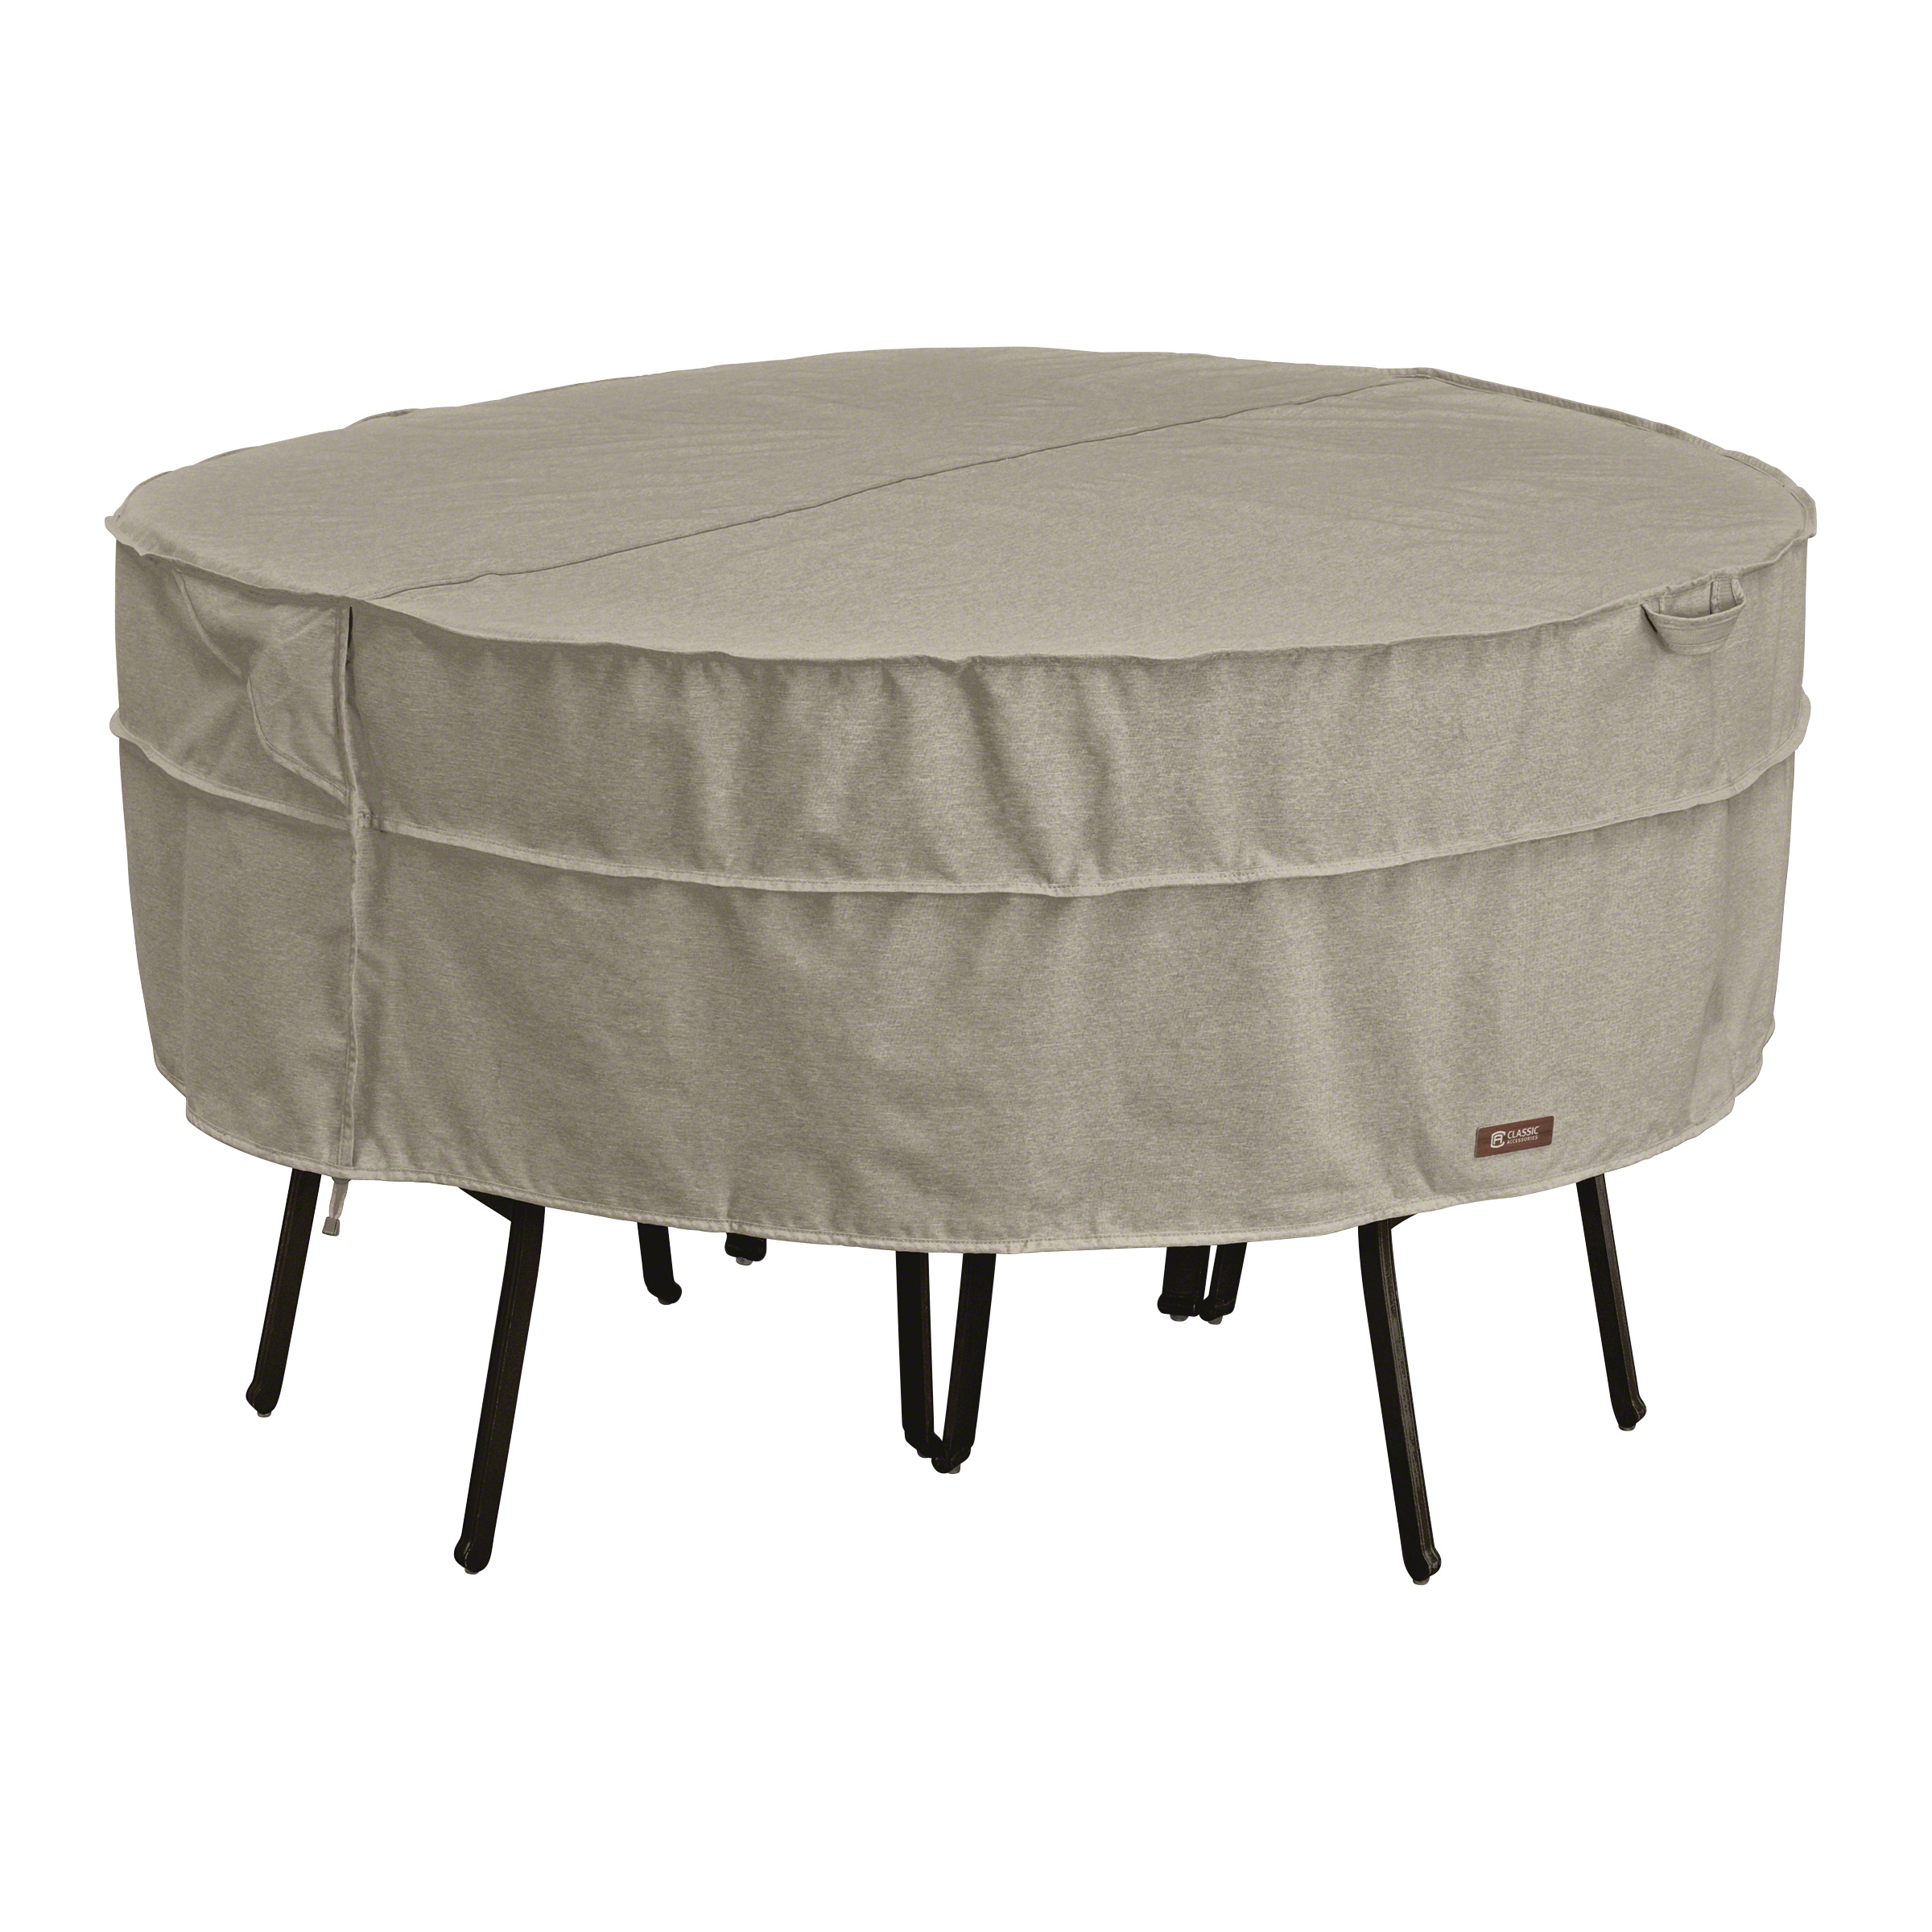 Classic Accessories Montlake Large Round Patio Table & Chair Set Cover